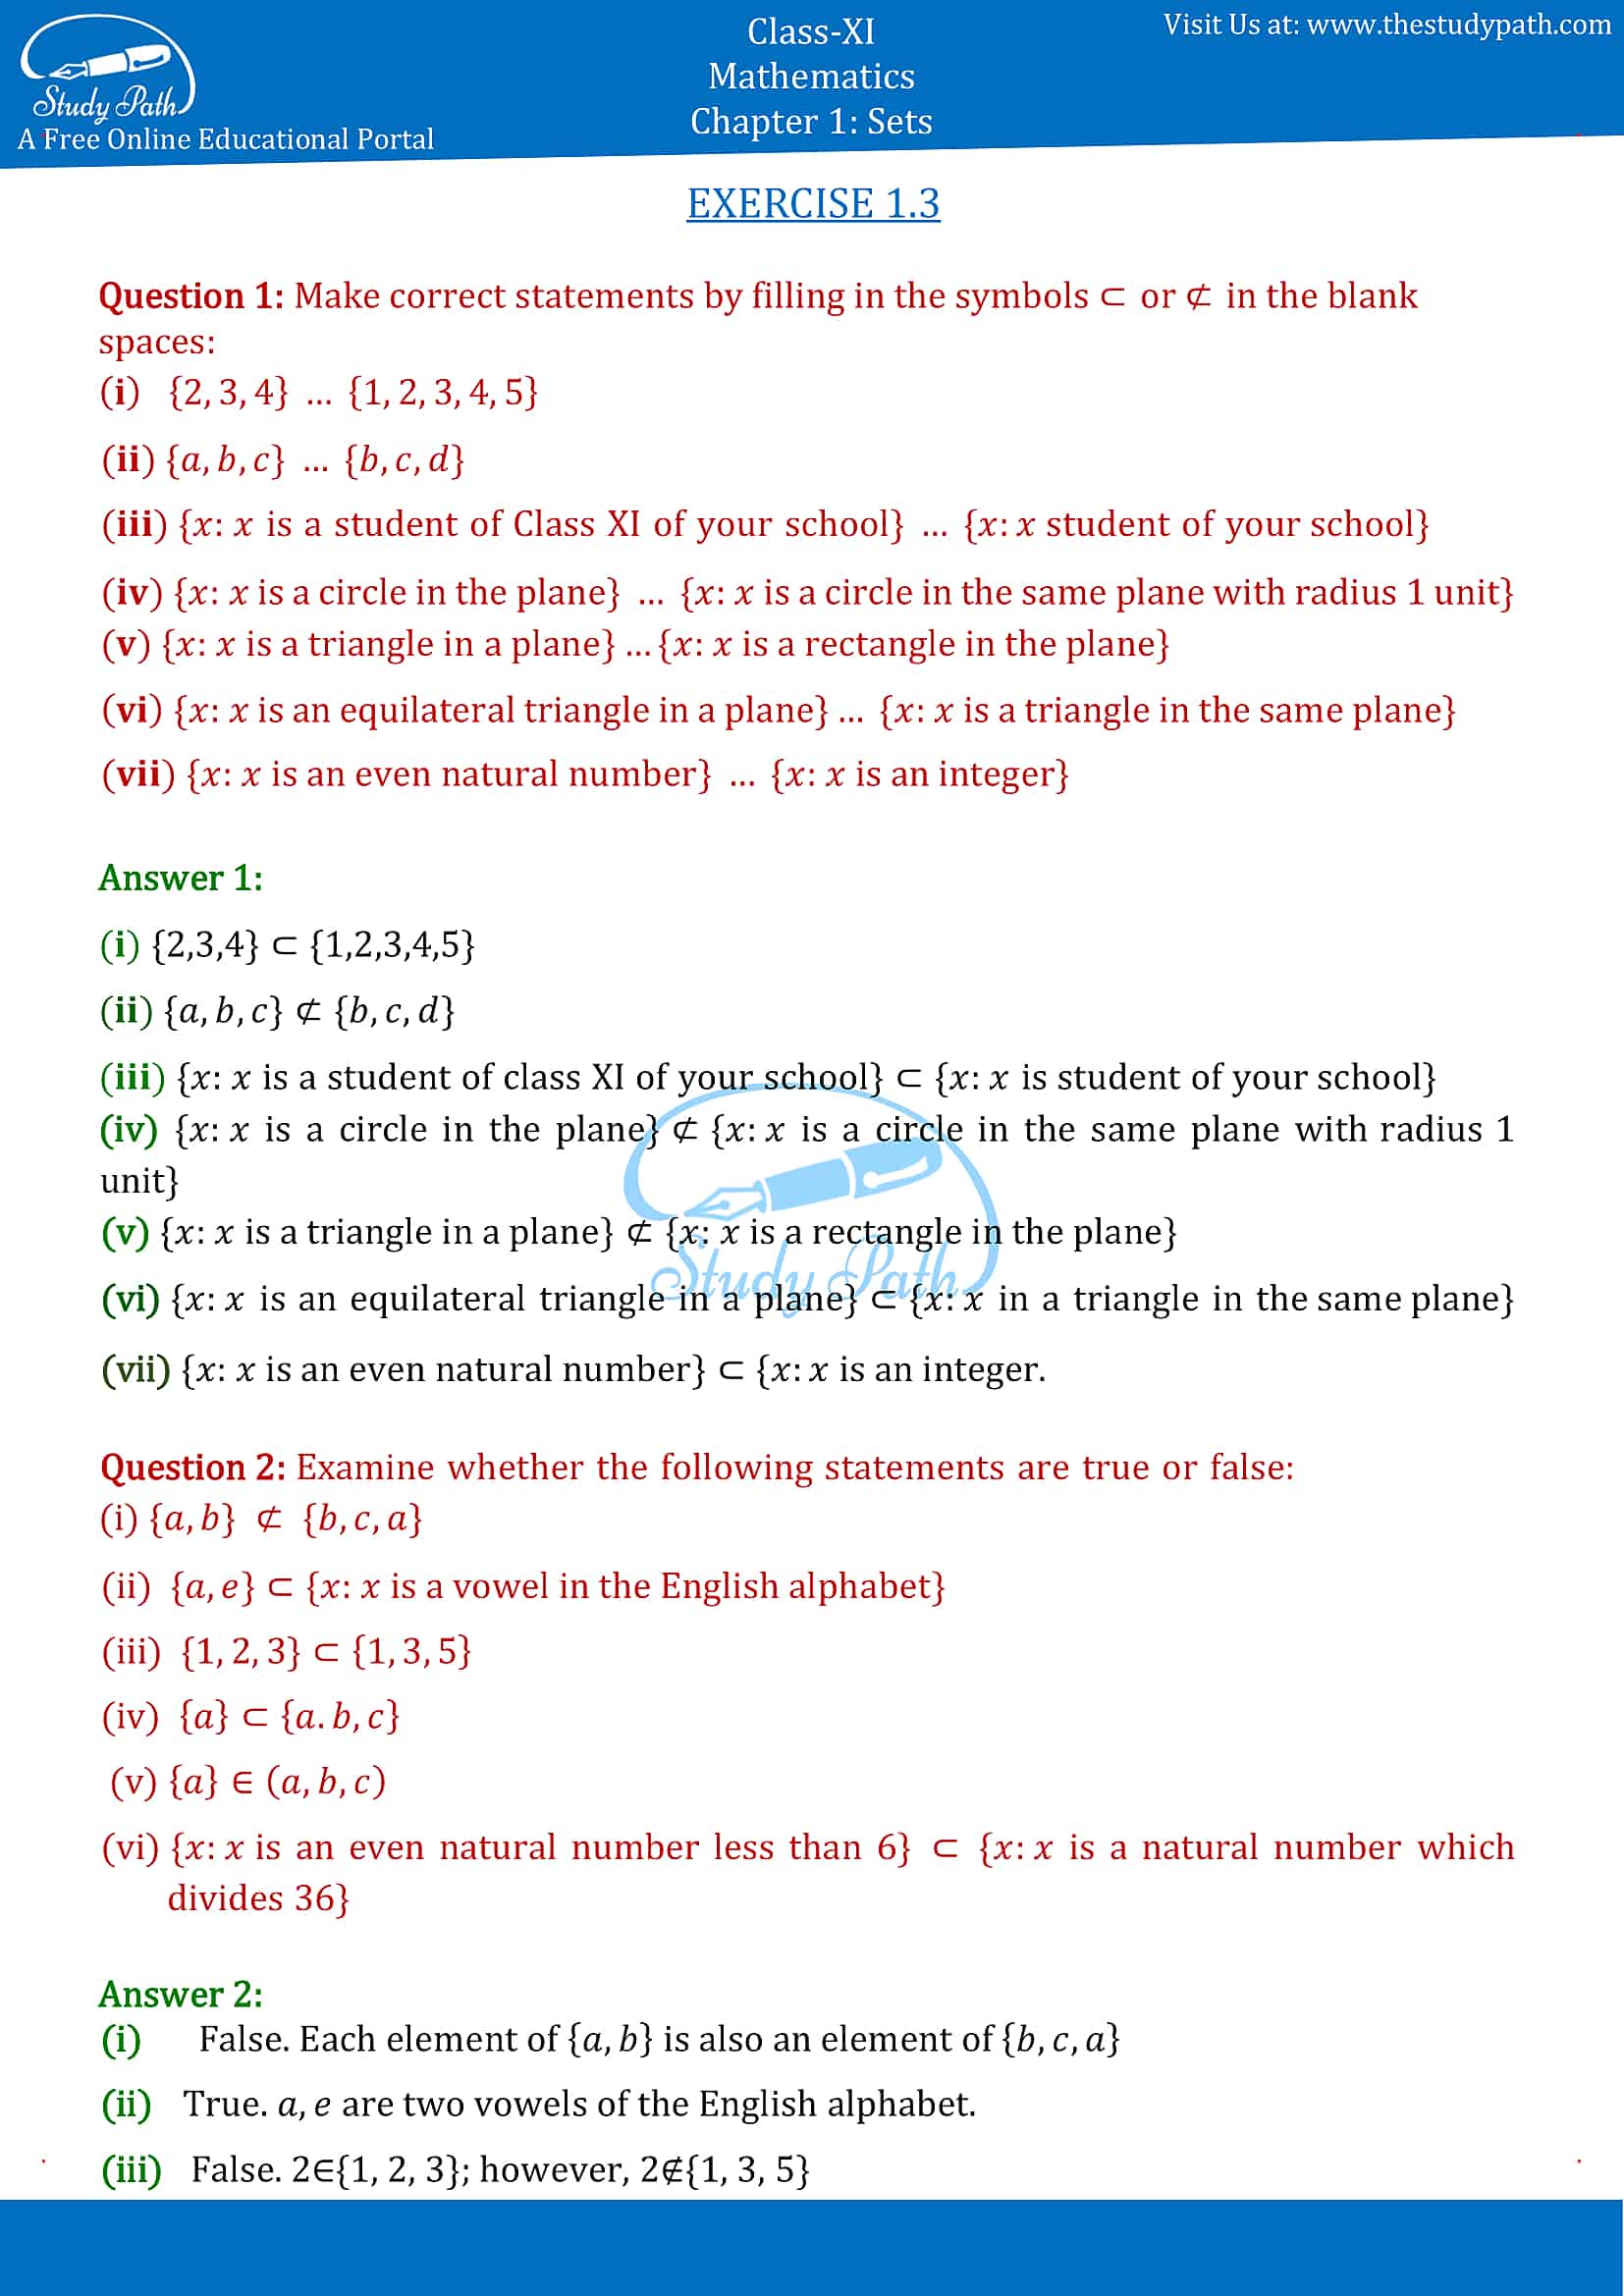 NCERT Solutions for Class 11 Maths chapter 1 sets Exercise 1.3